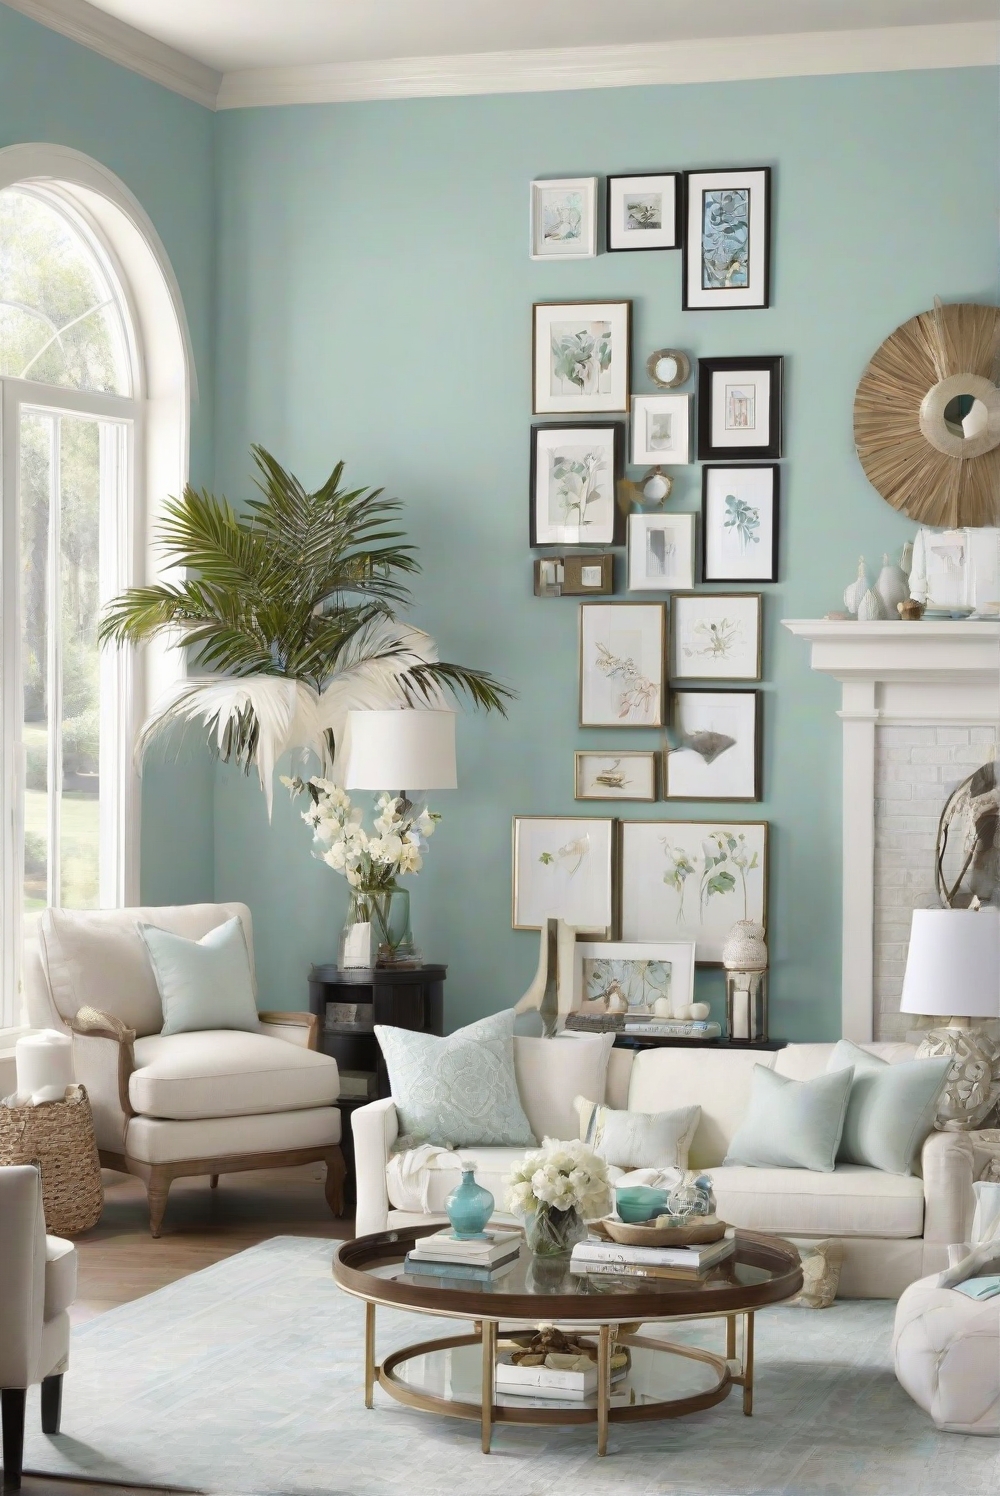 Watery SW 6478, wall paint colors, interior design, home decor, kitchen design, living room interior, paint color matching, bedroom design